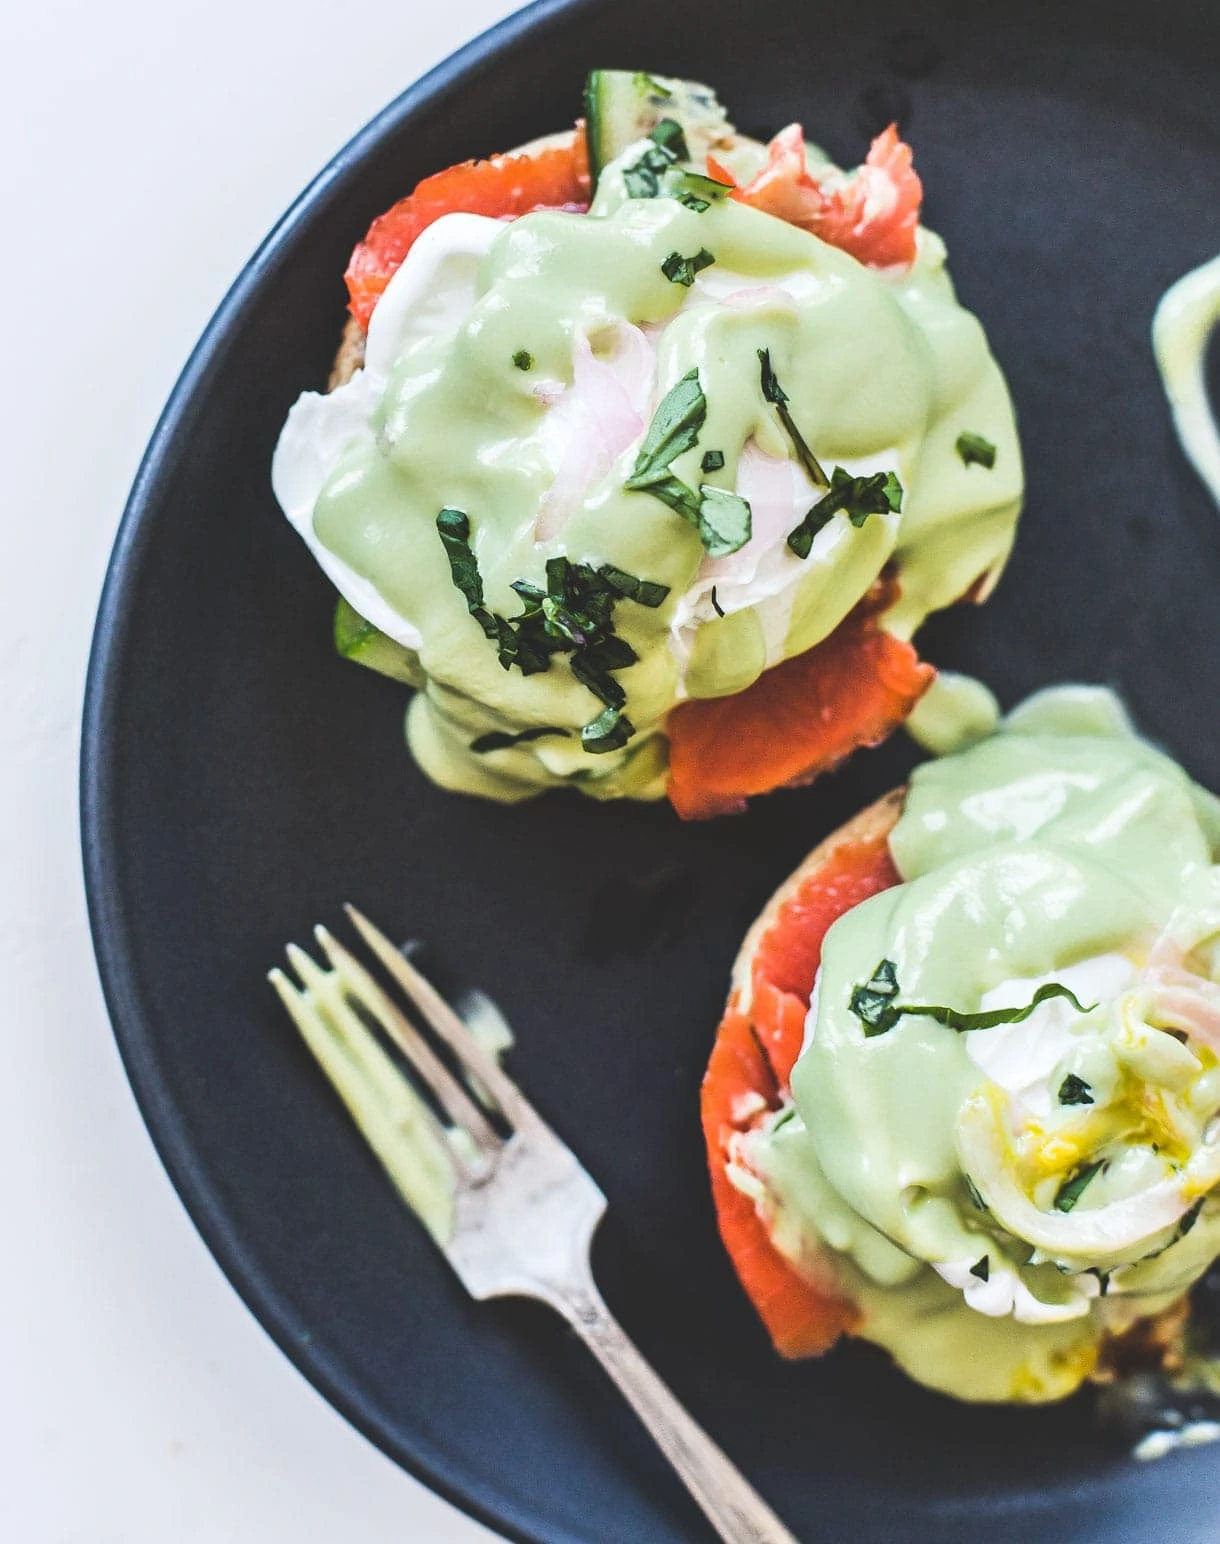 Smoked Salmon Eggs Benedict with Avocado Sauce, with cucumbers and pickled onions